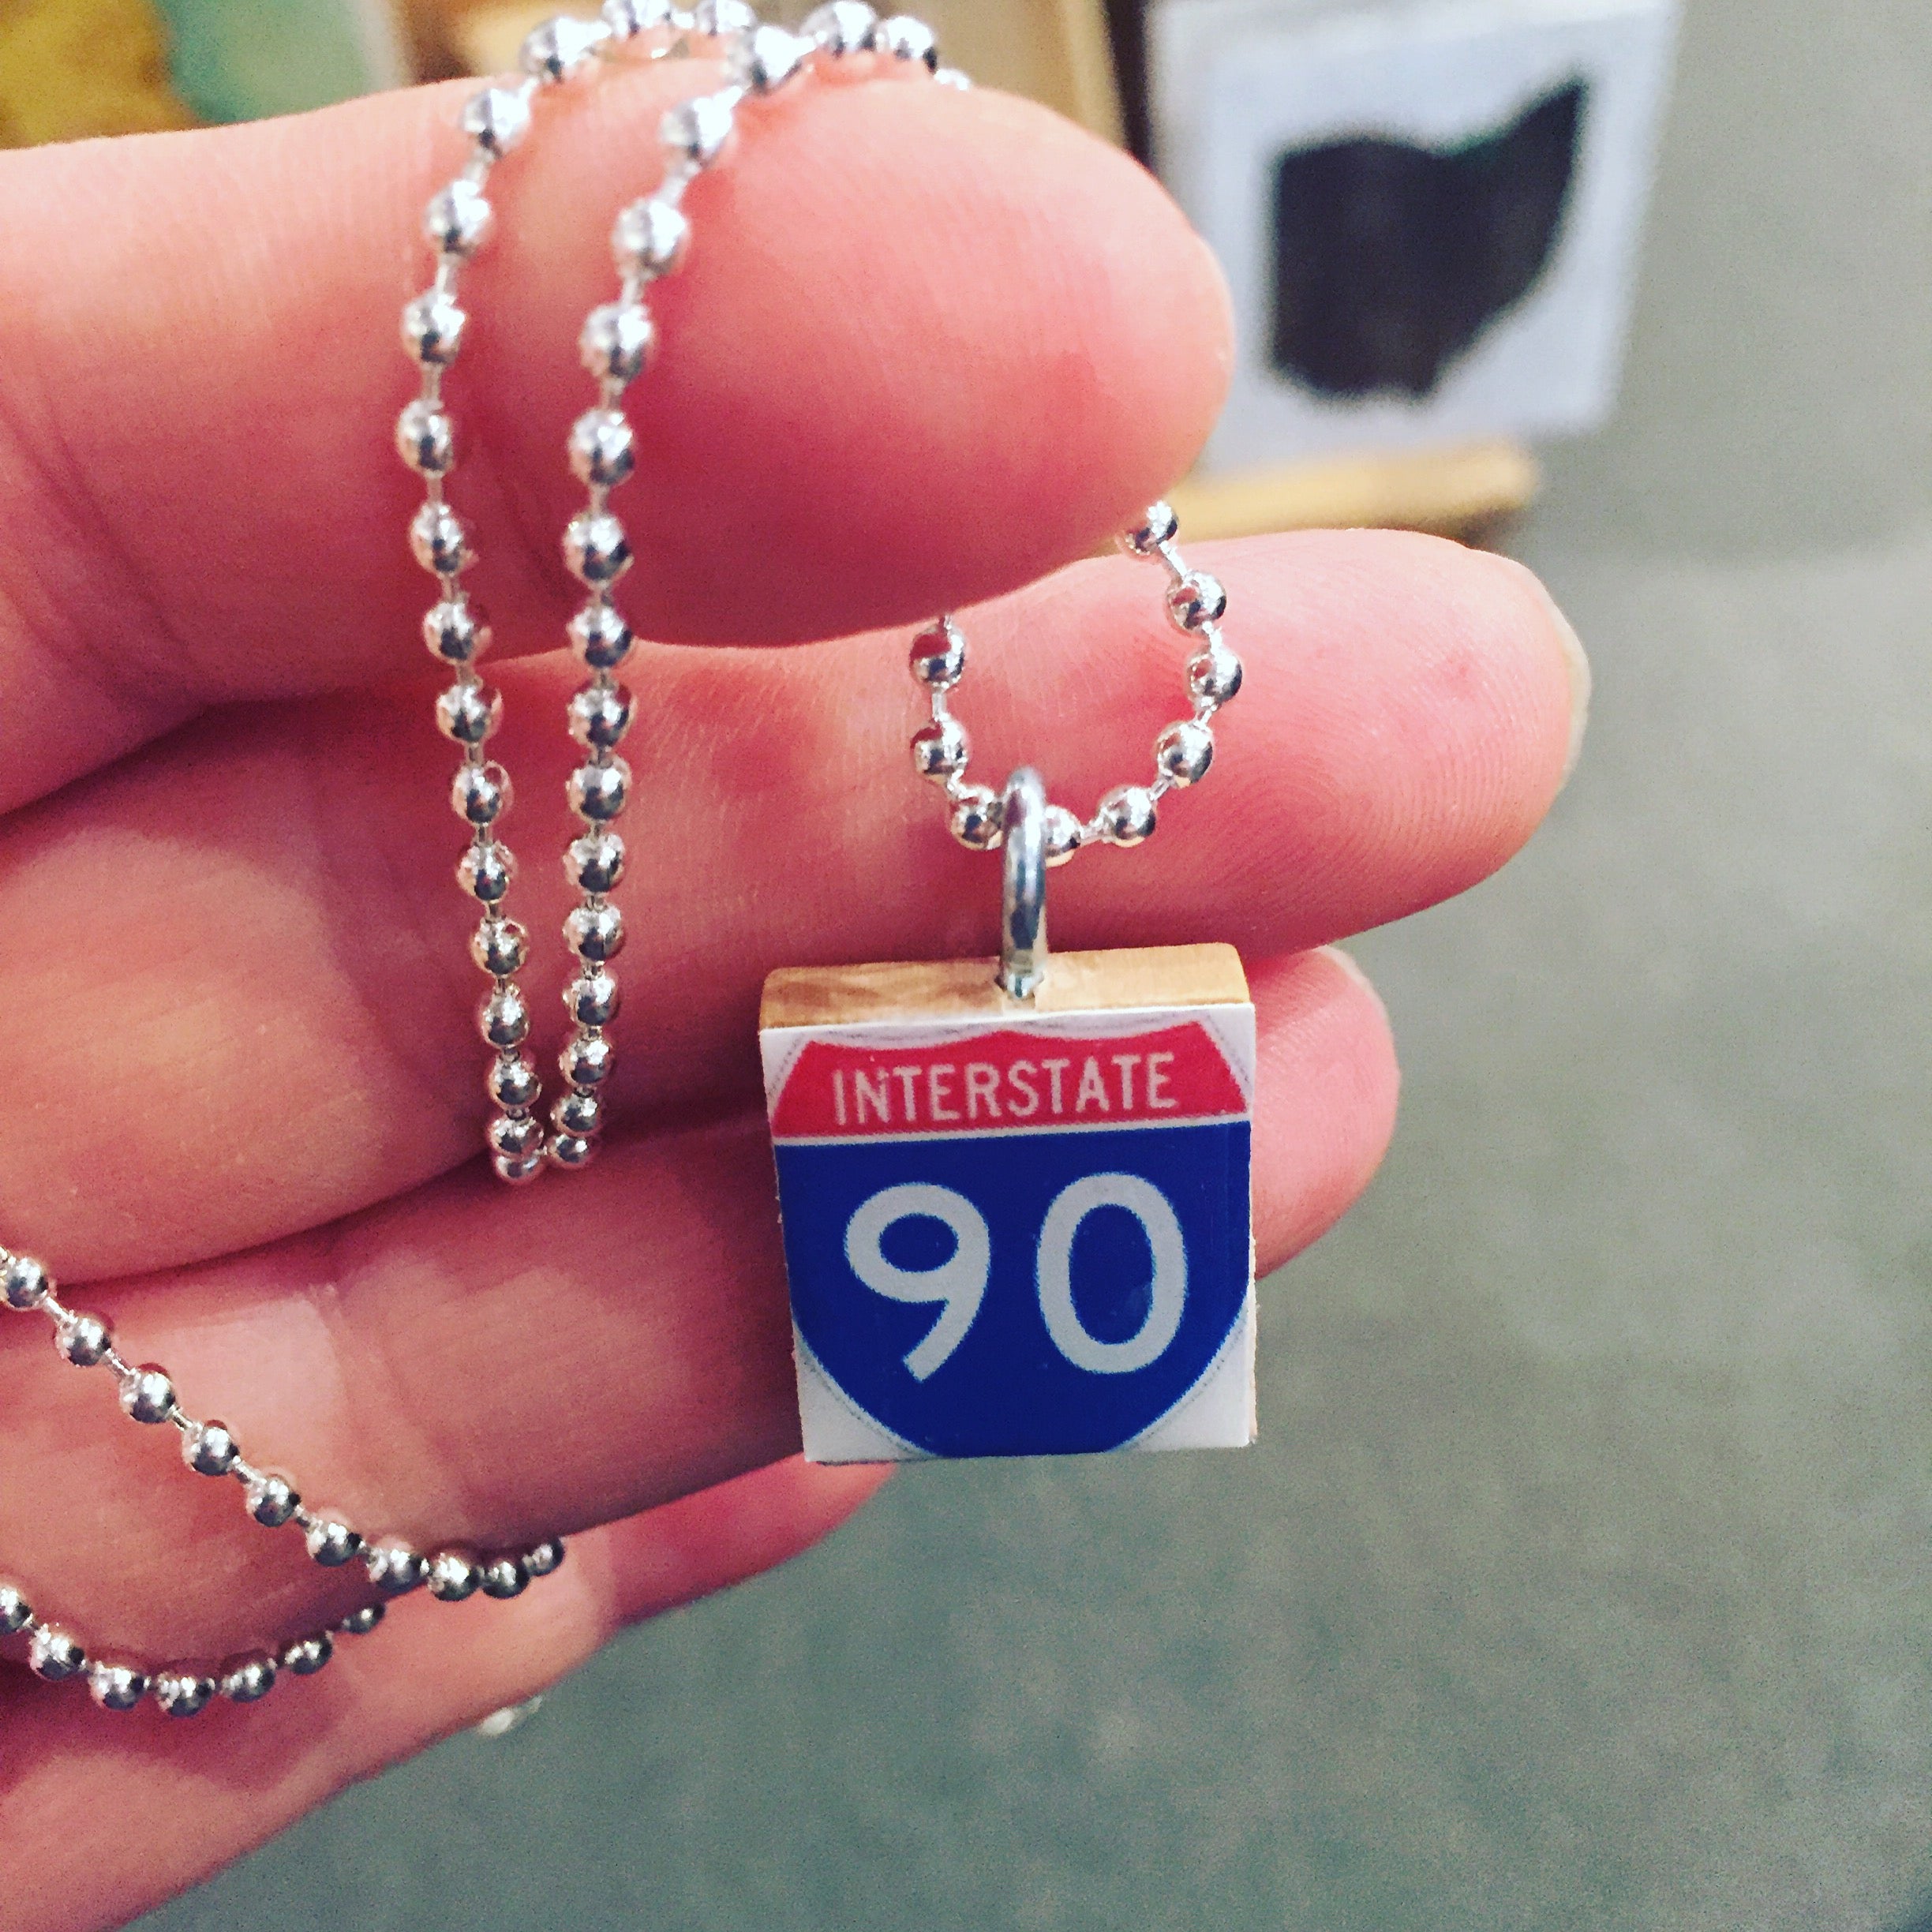 Interstate 90 Scrabble Pendant With Ball Chain